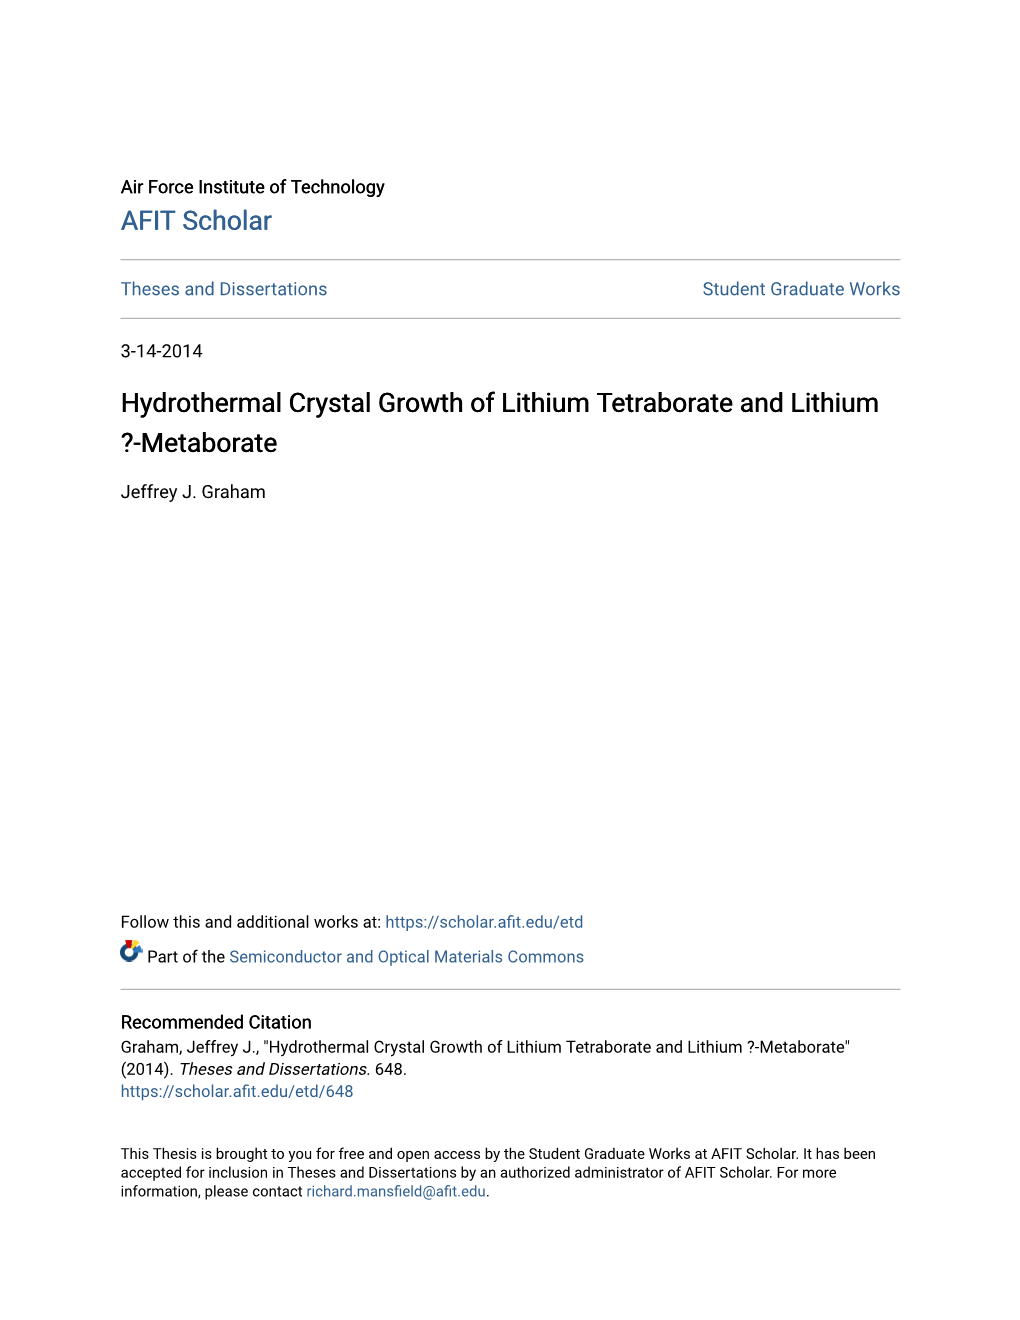 Hydrothermal Crystal Growth of Lithium Tetraborate and Lithium ?-Metaborate